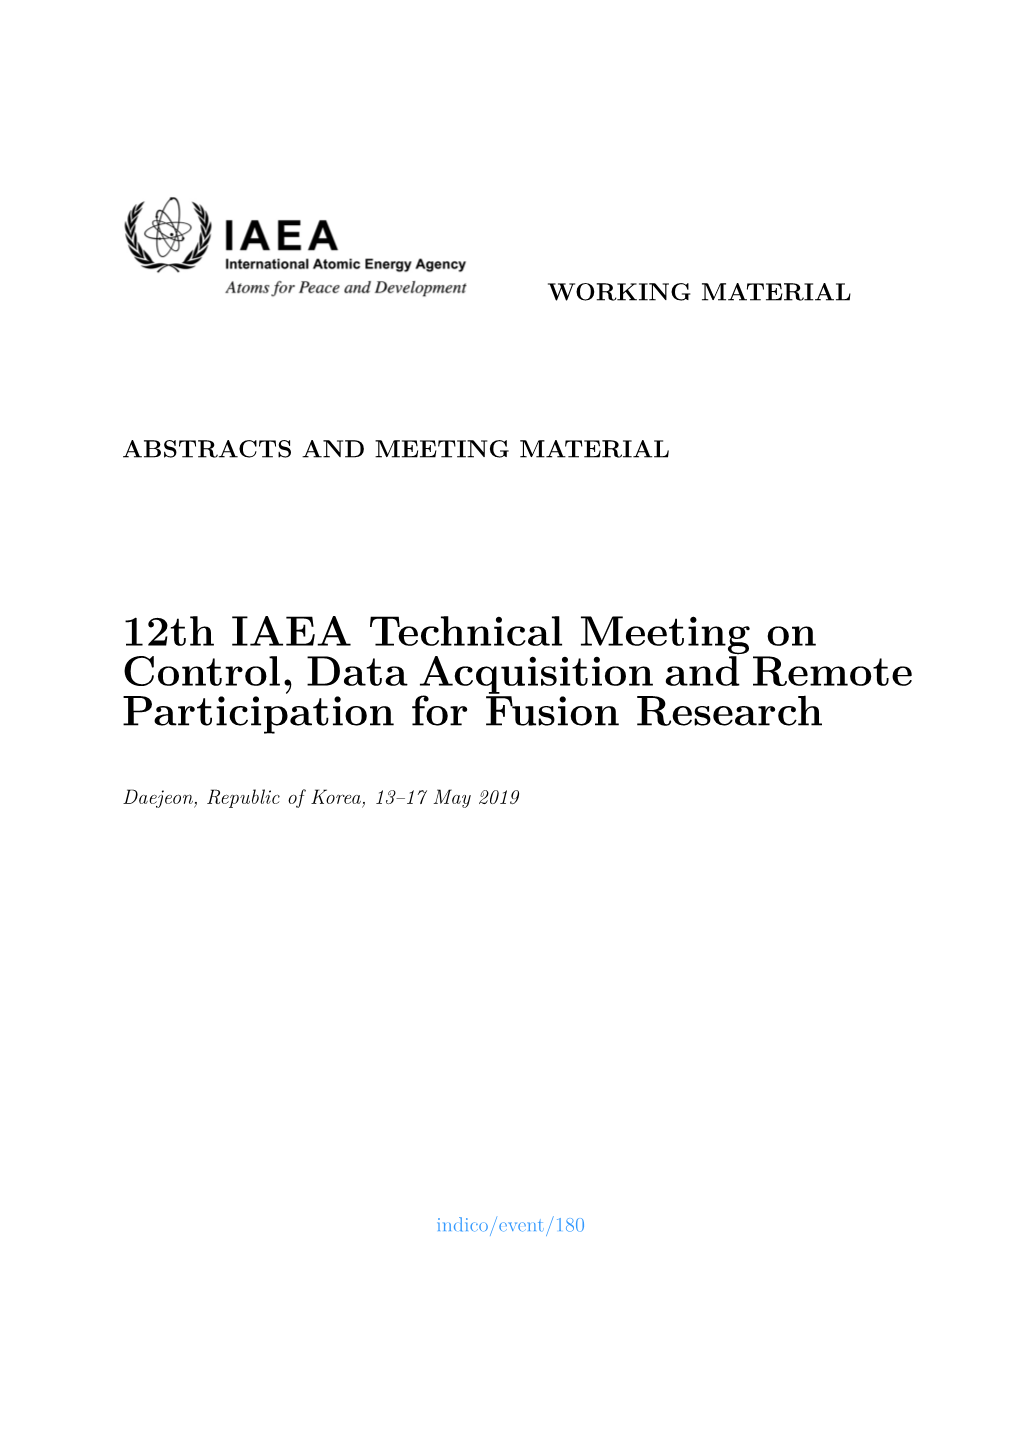 12Th IAEA Technical Meeting on Control, Data Acquisition and Remote Participation for Fusion Research